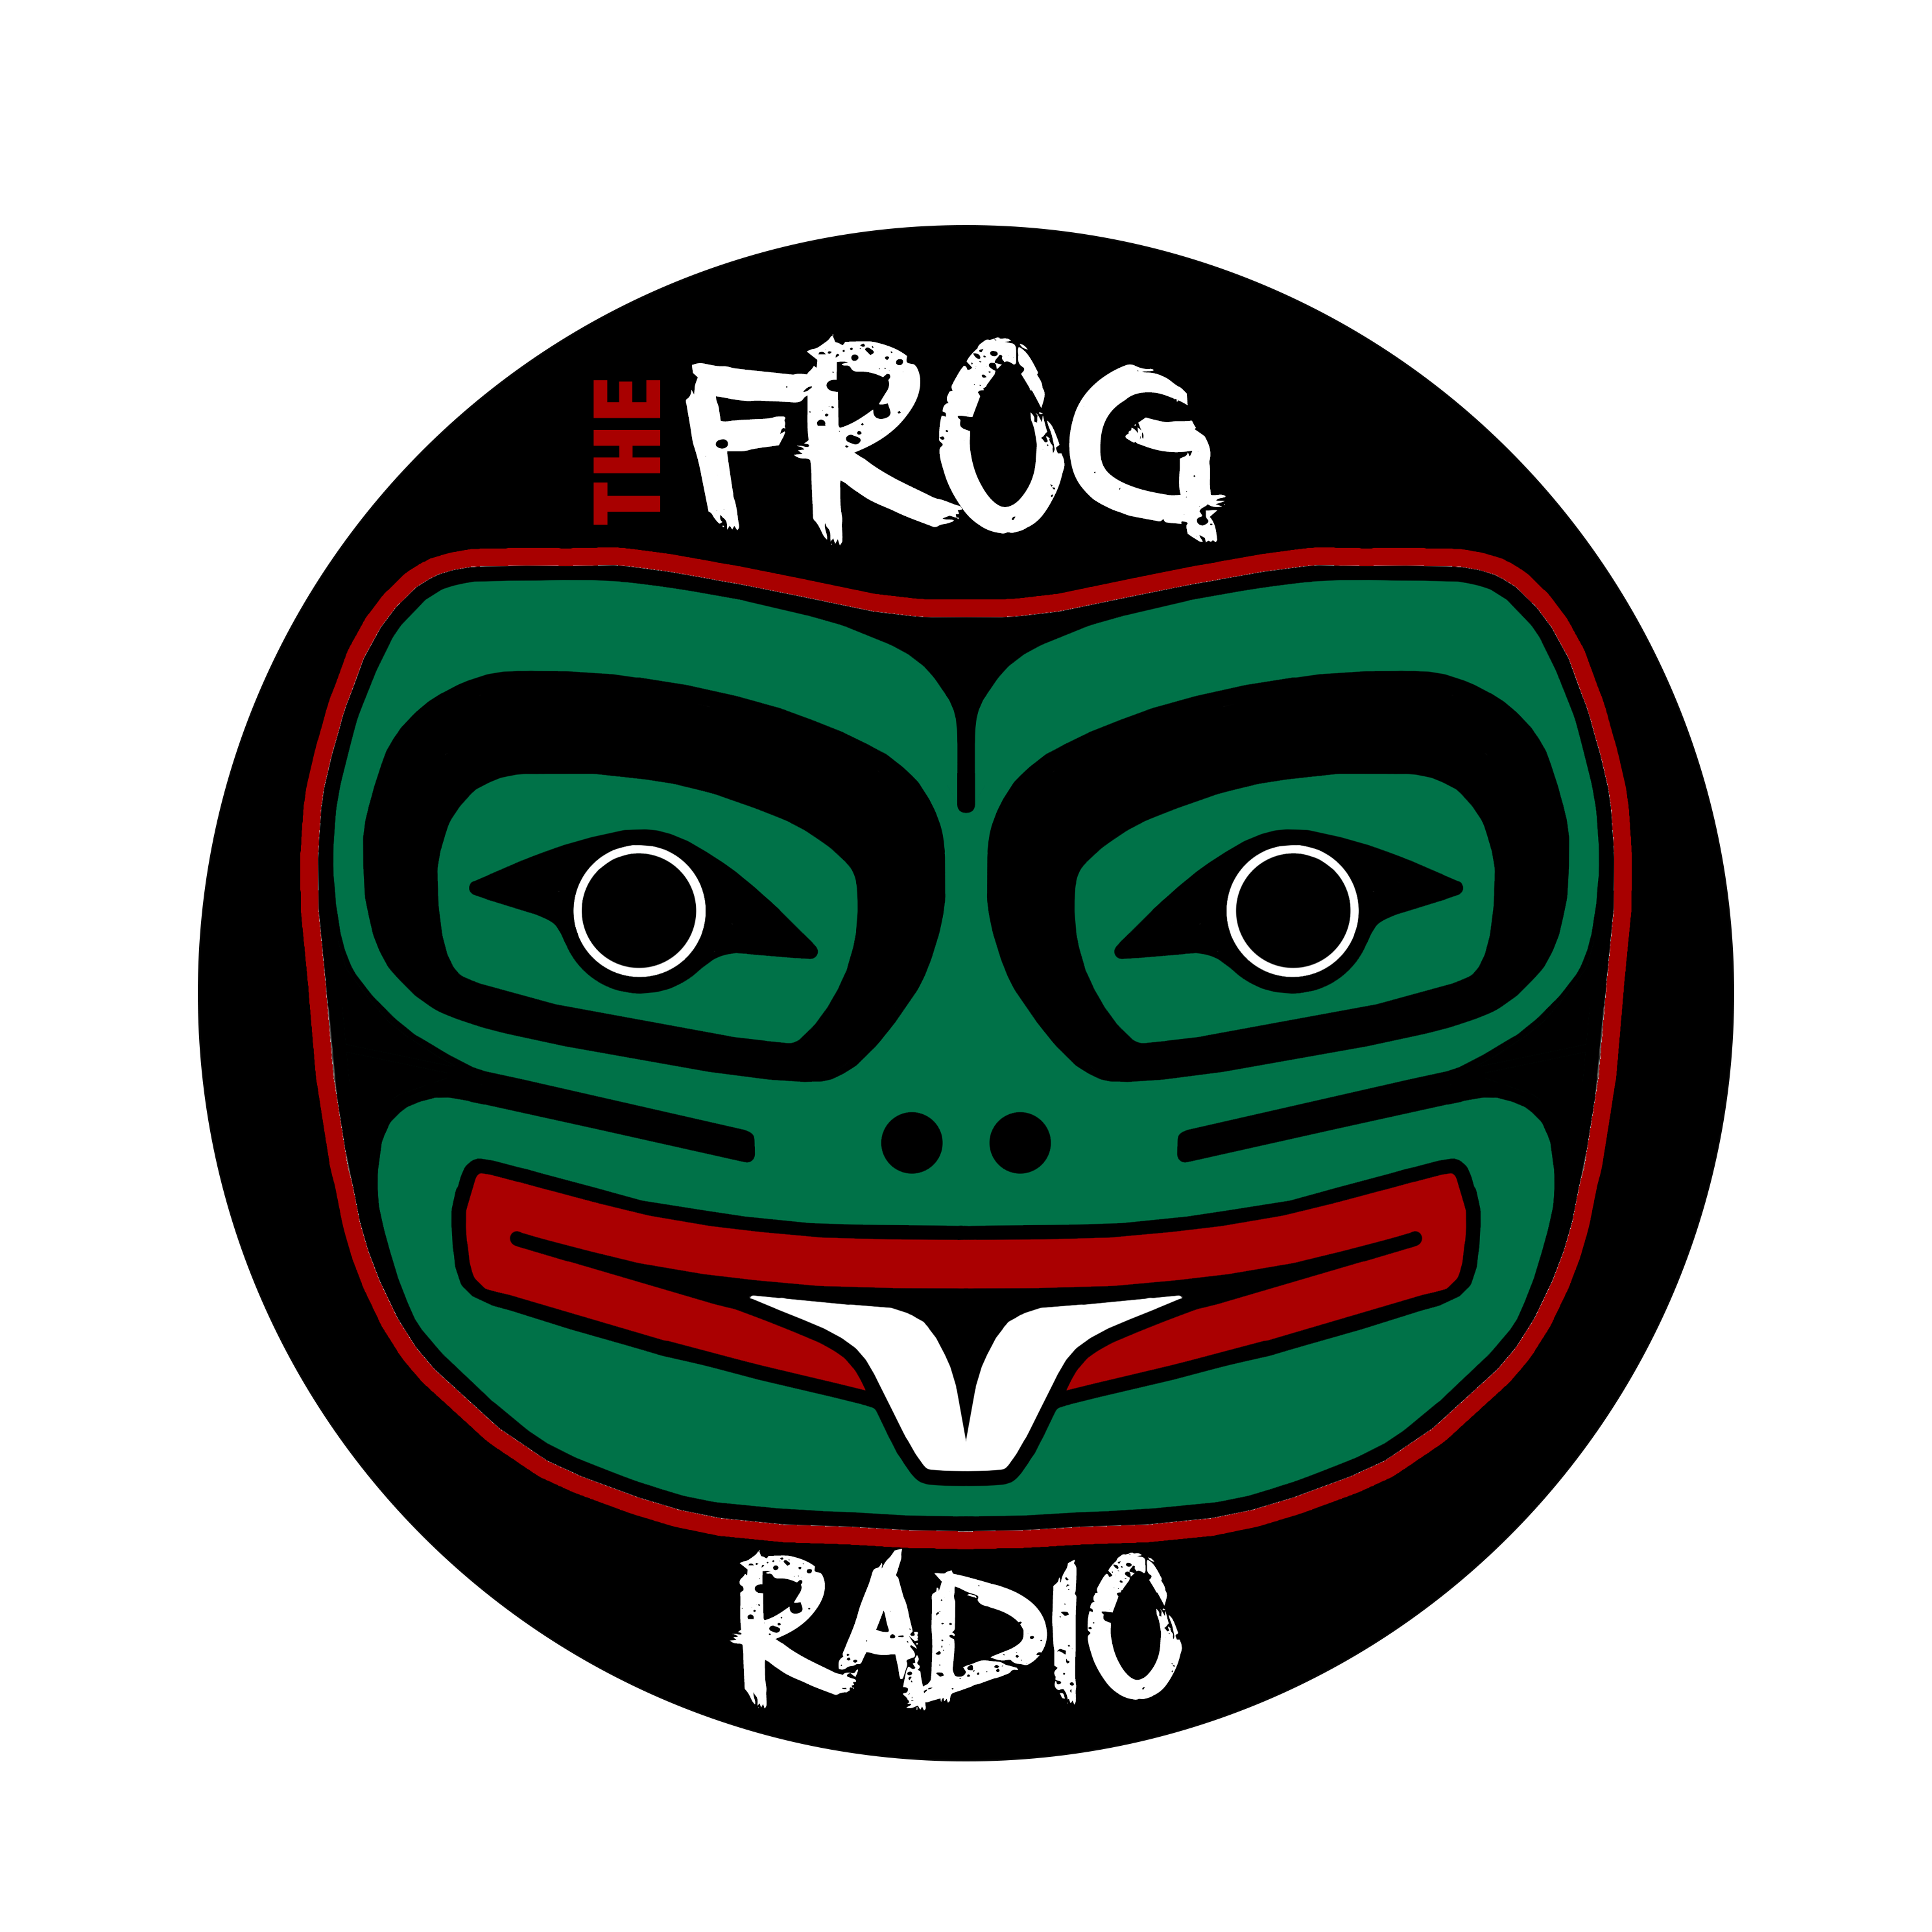 Art for All indigenous! All by the time! The Frog Radio